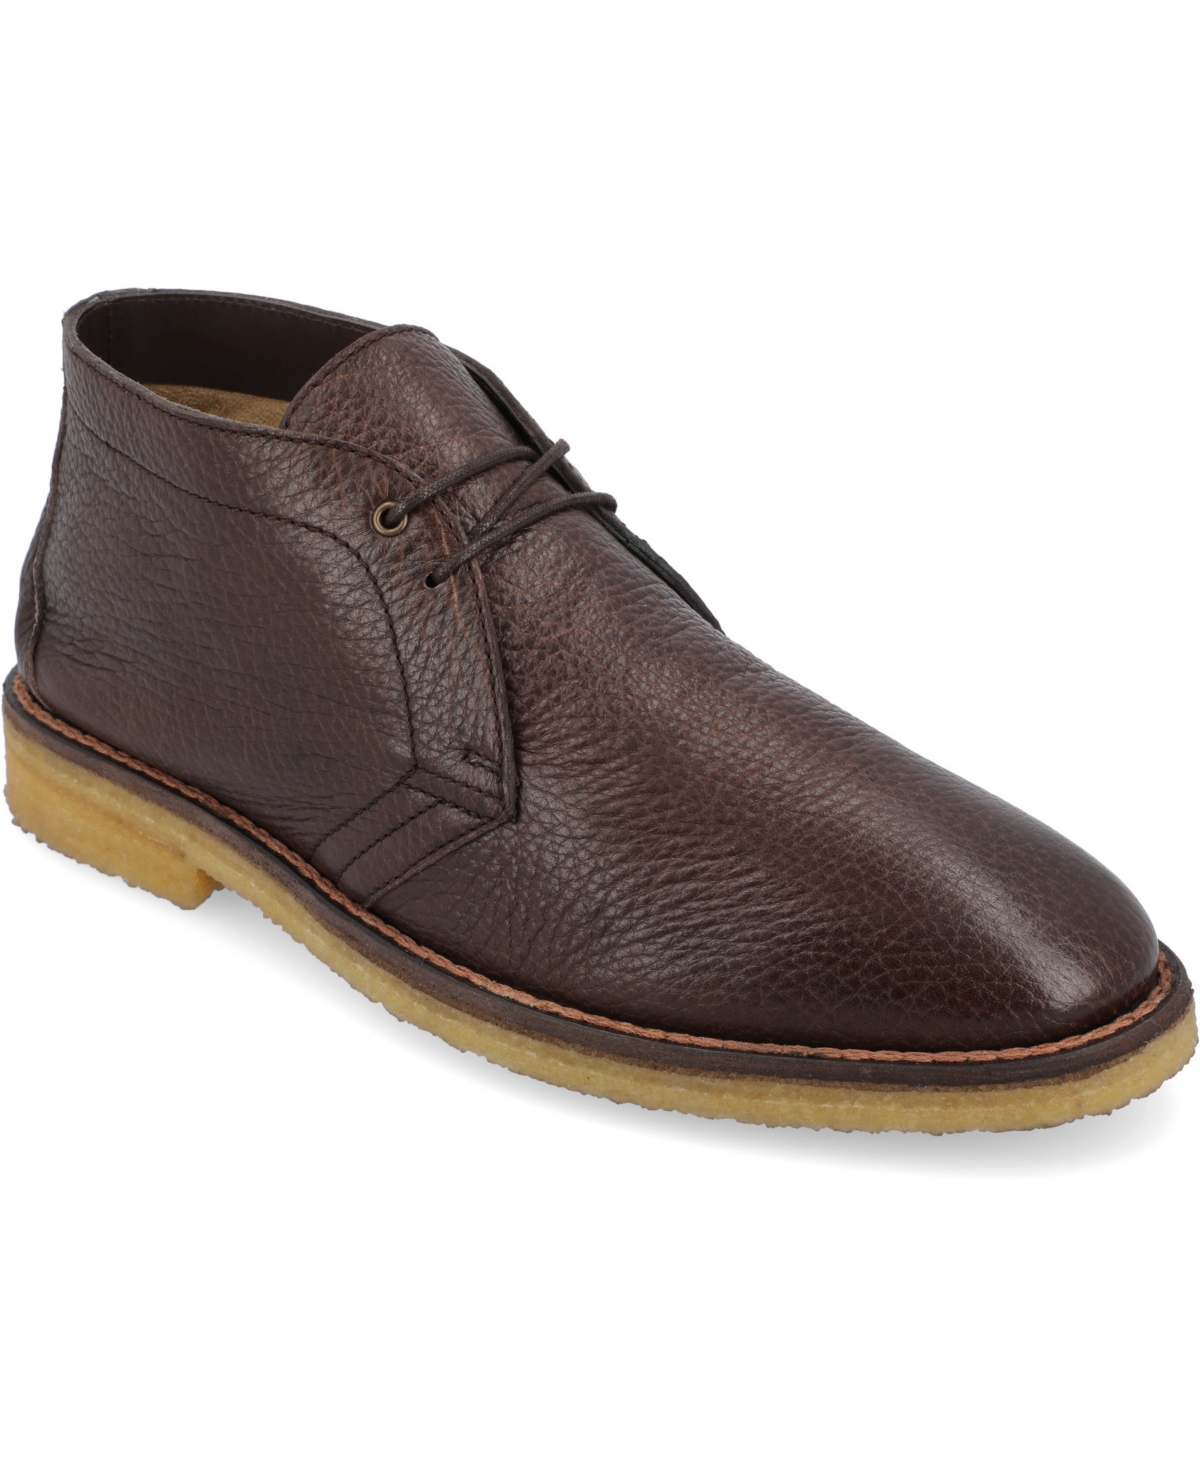 Men's Chukka Lace-up Boot - Coffee